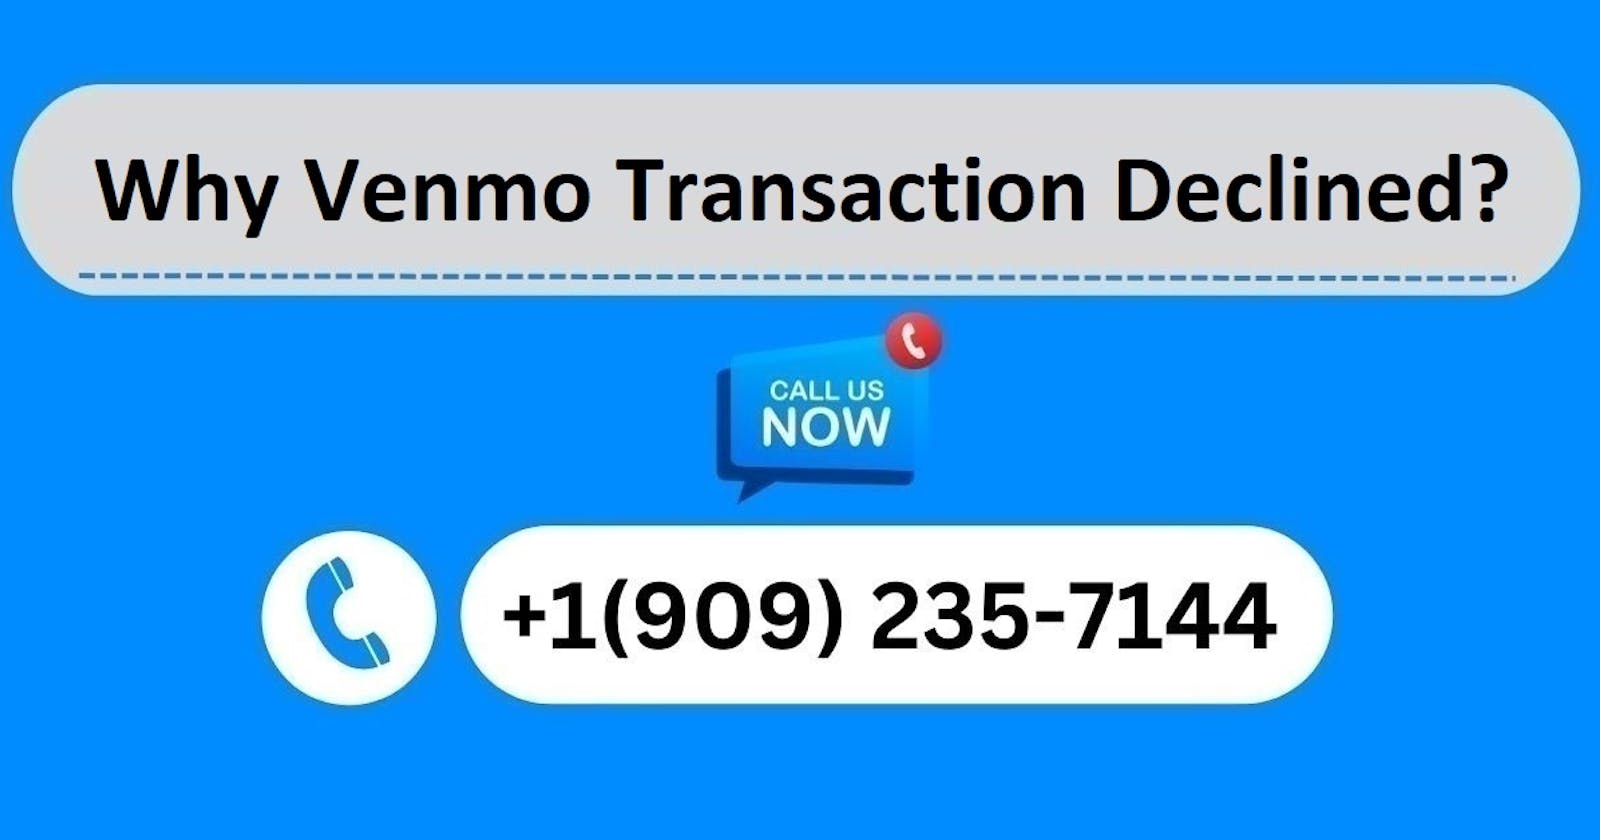 Why Venmo Transaction Declined? Reasons And Solutions